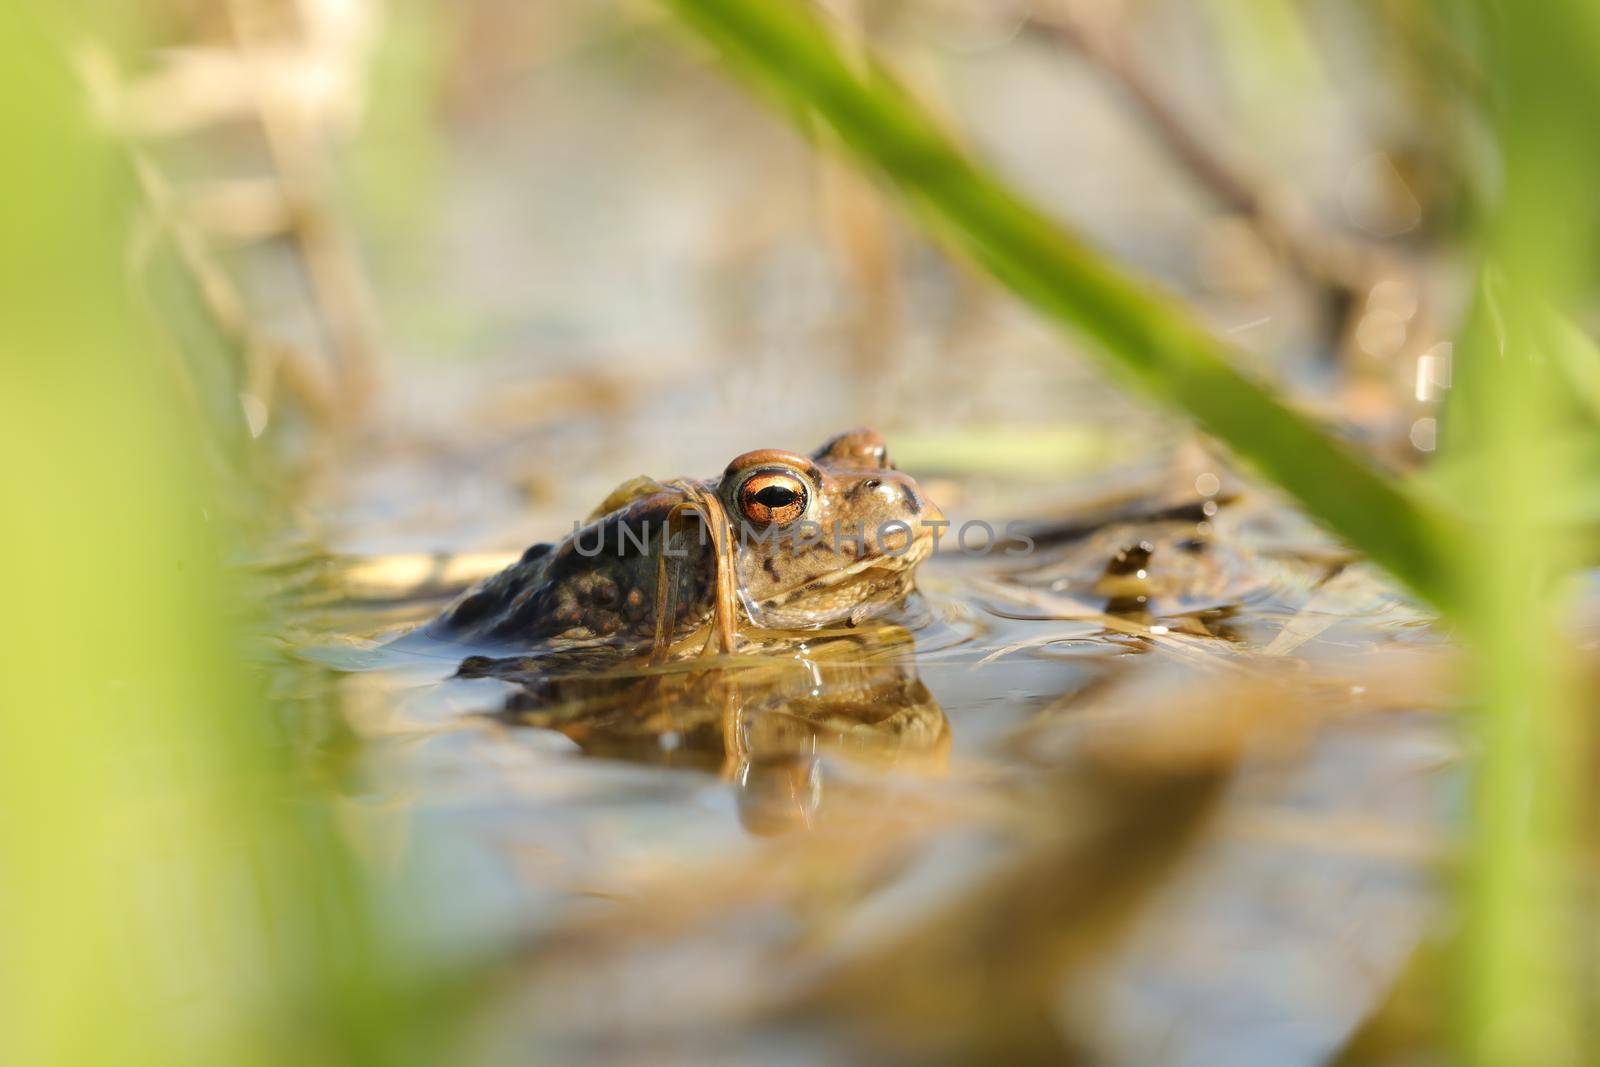 Frog in a pond during mating season.